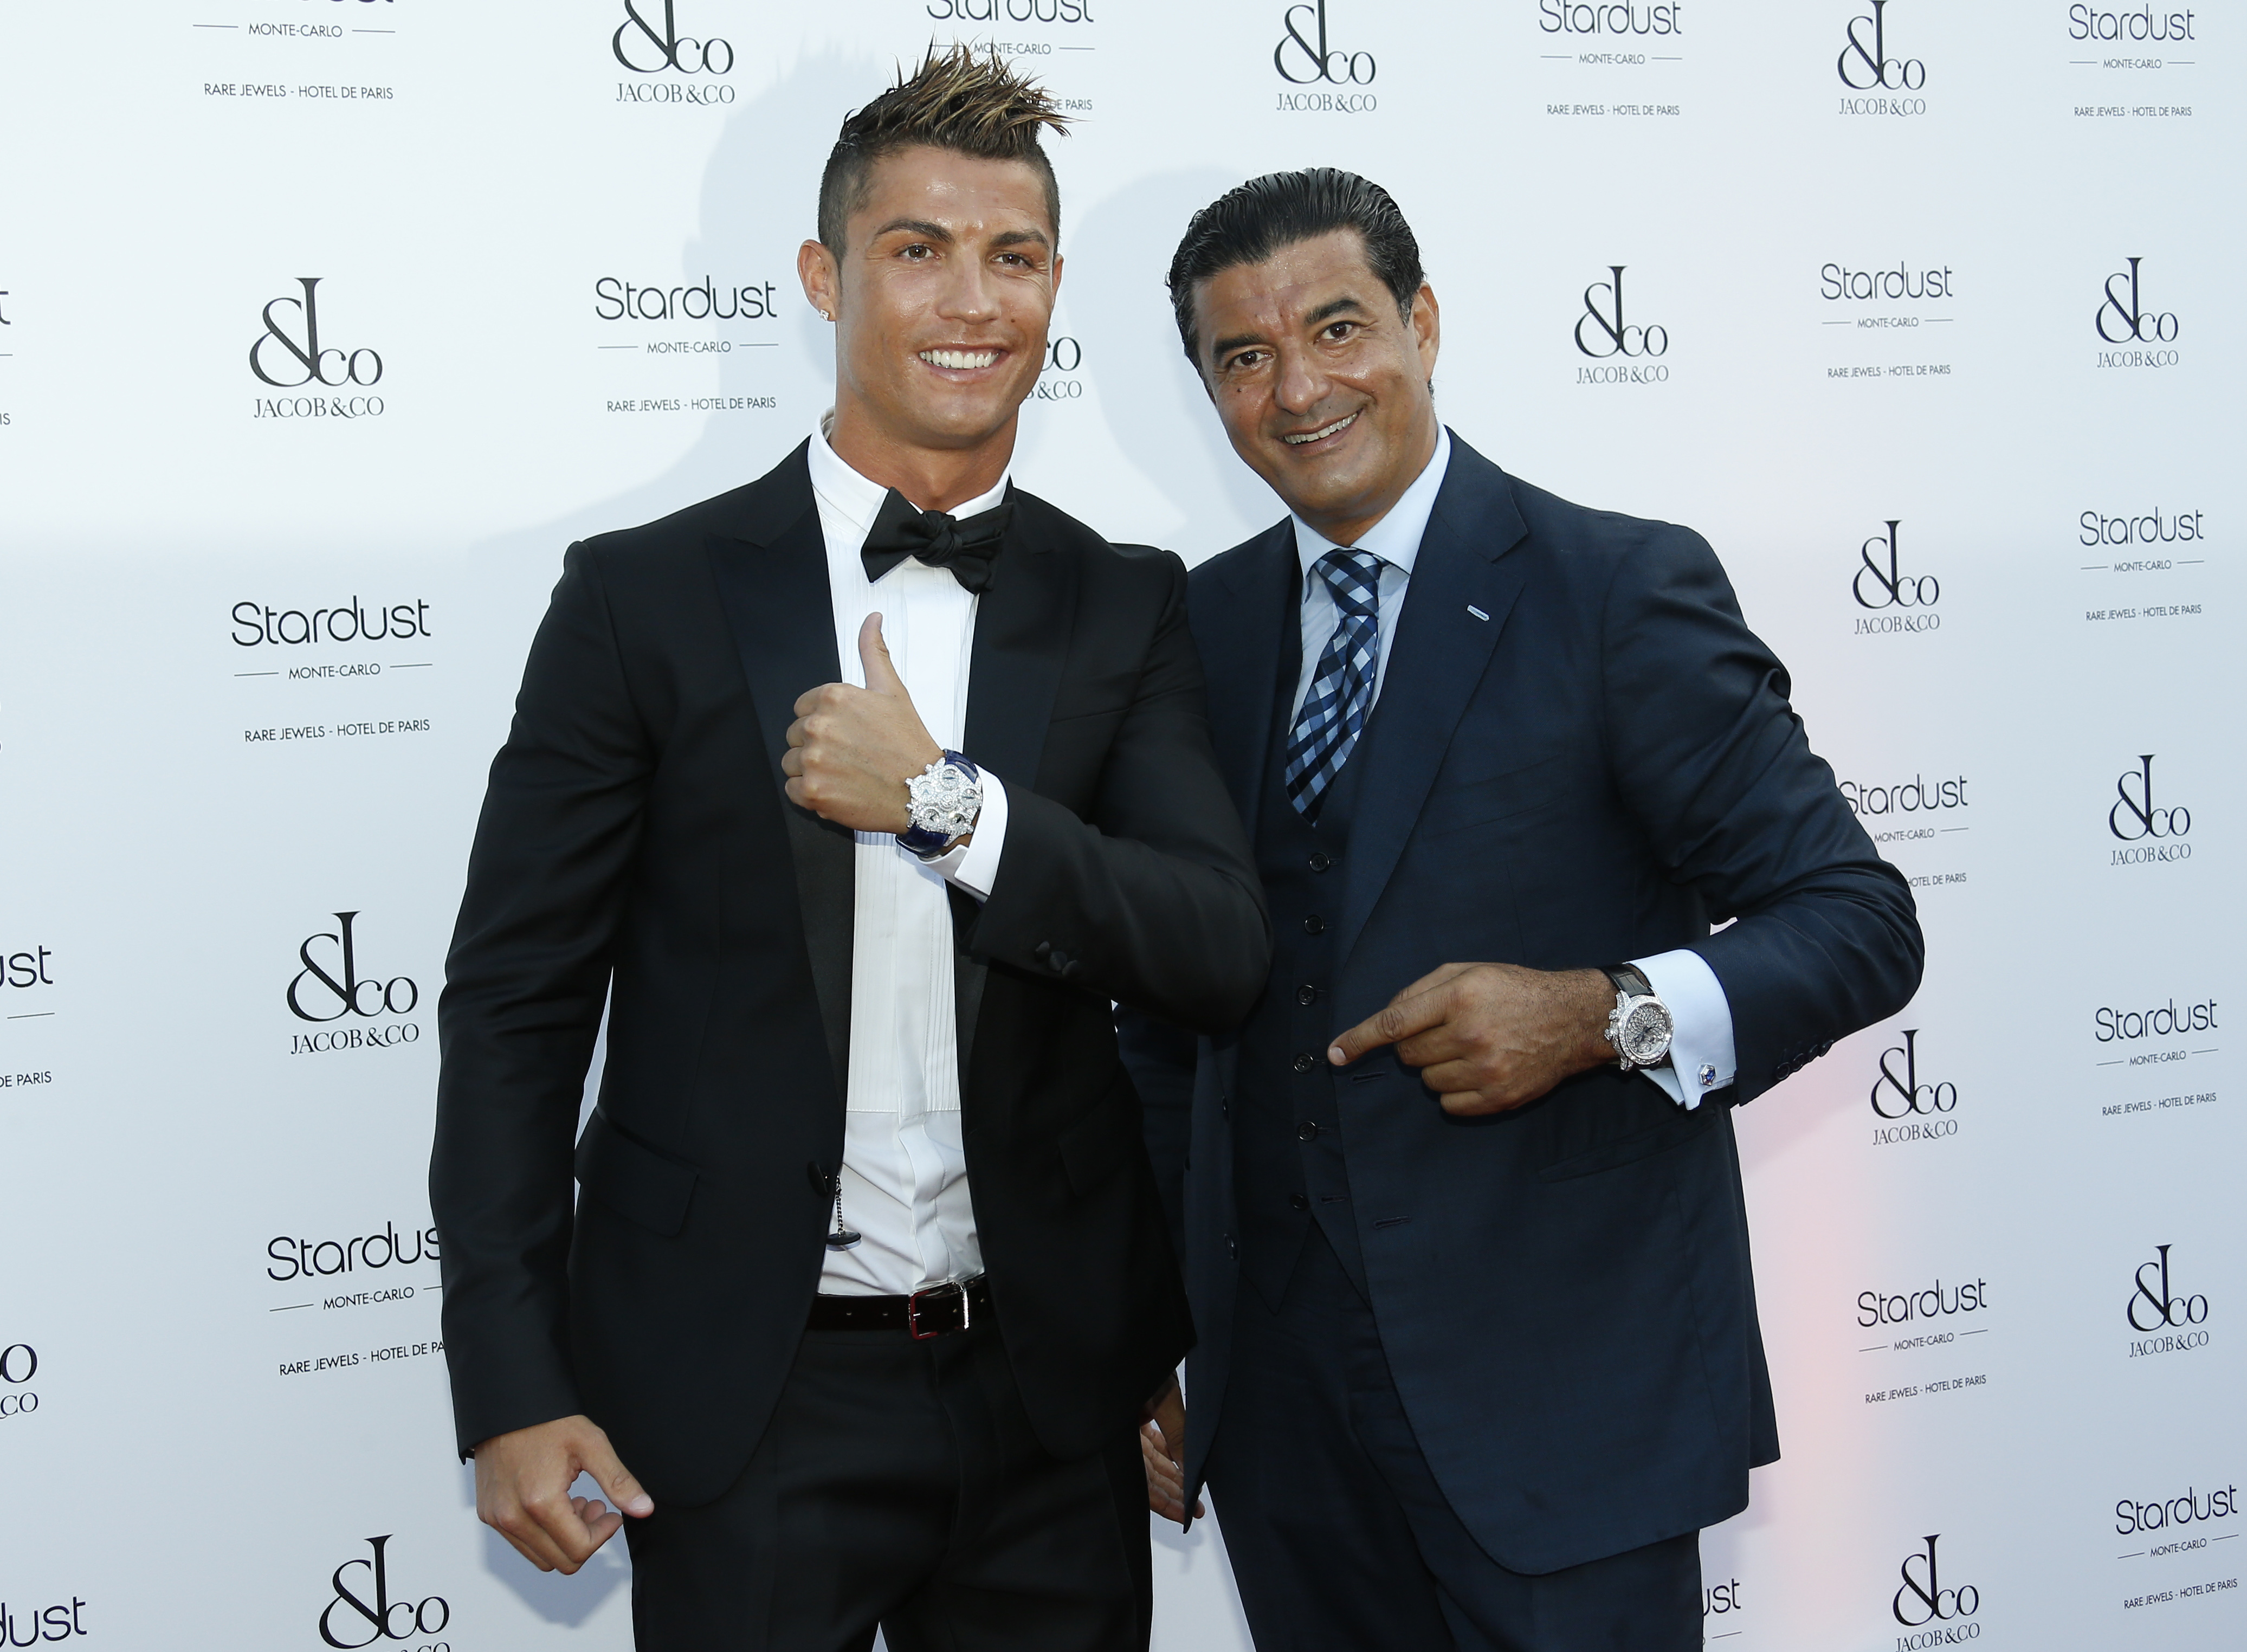 Ronaldo's most expensive watch, pictured, is worth £1.6m